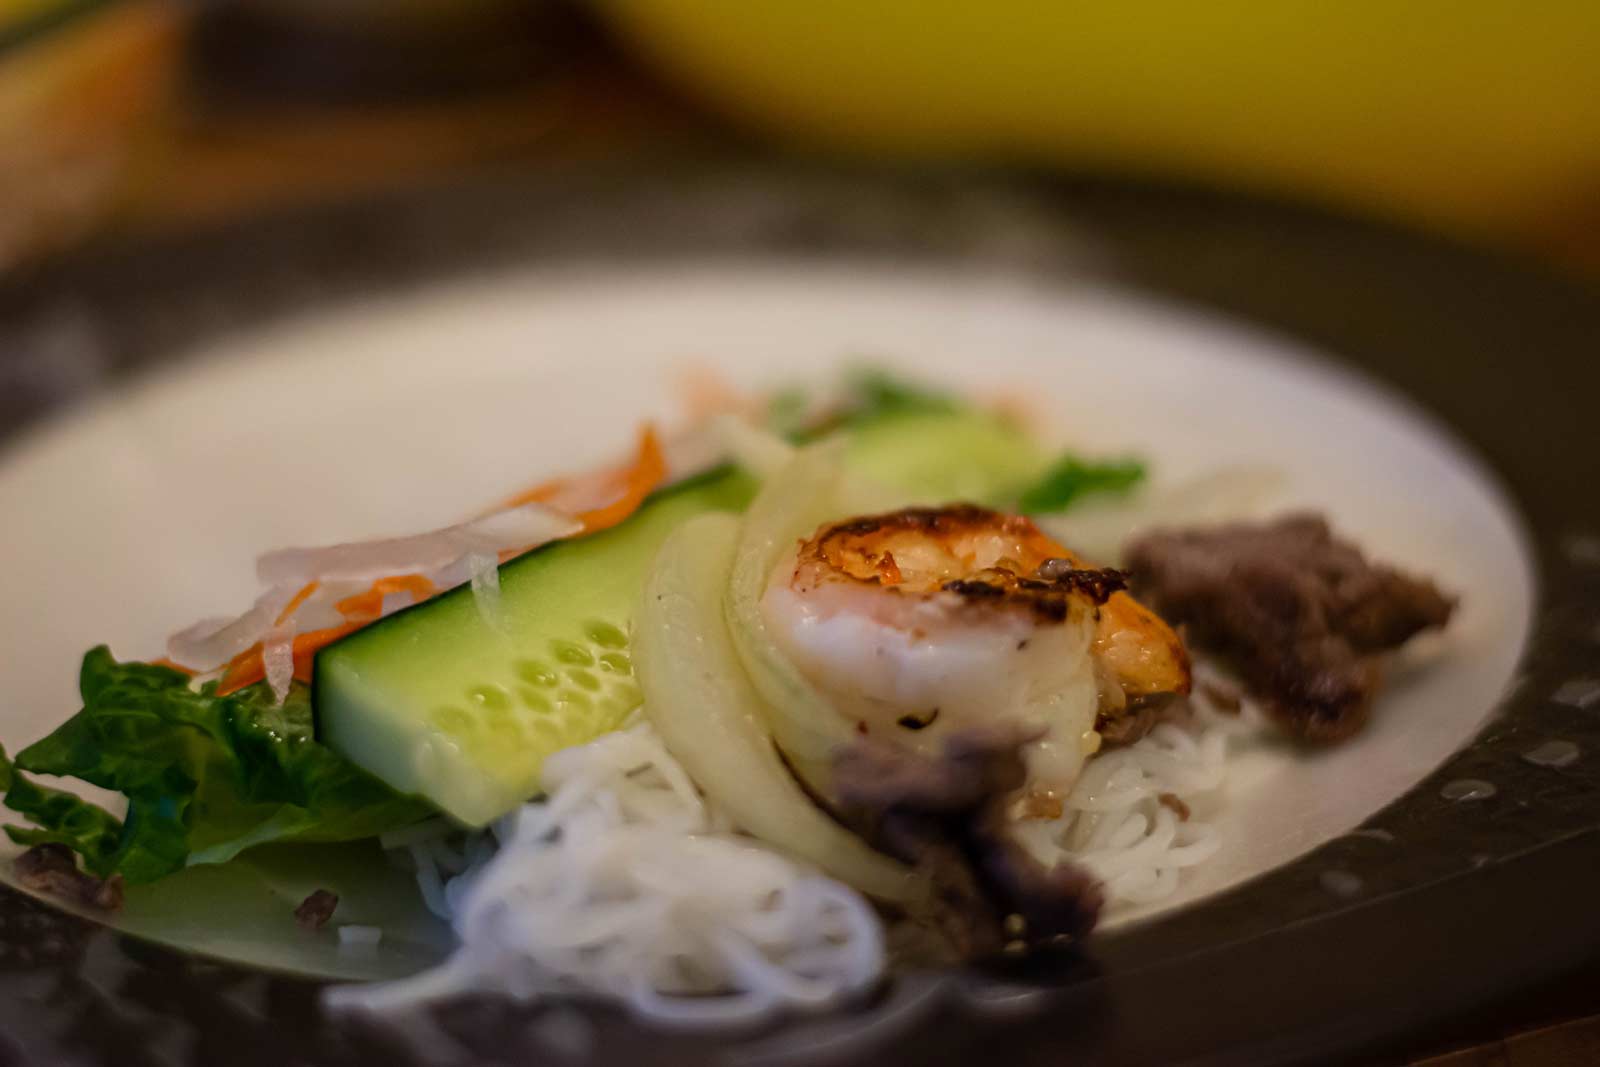 Cucumber, shrimp, carrots, lean beef, sprouts, lettuce and daikon sit on a plate.